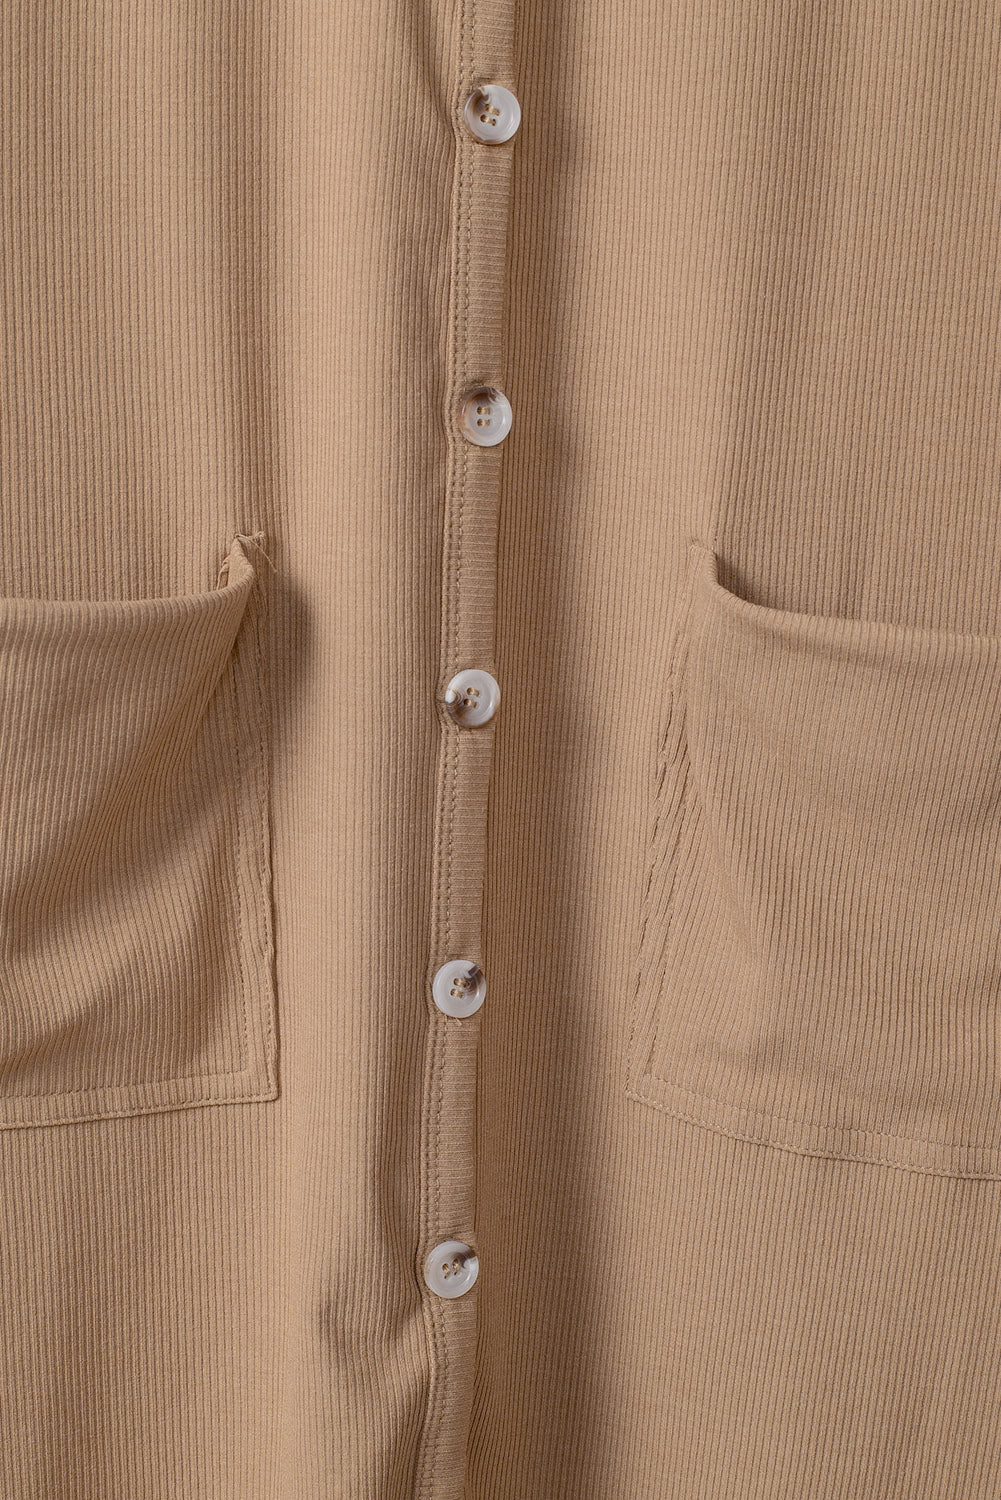 Apricot Selected Button Pocketed High Low Cardigan